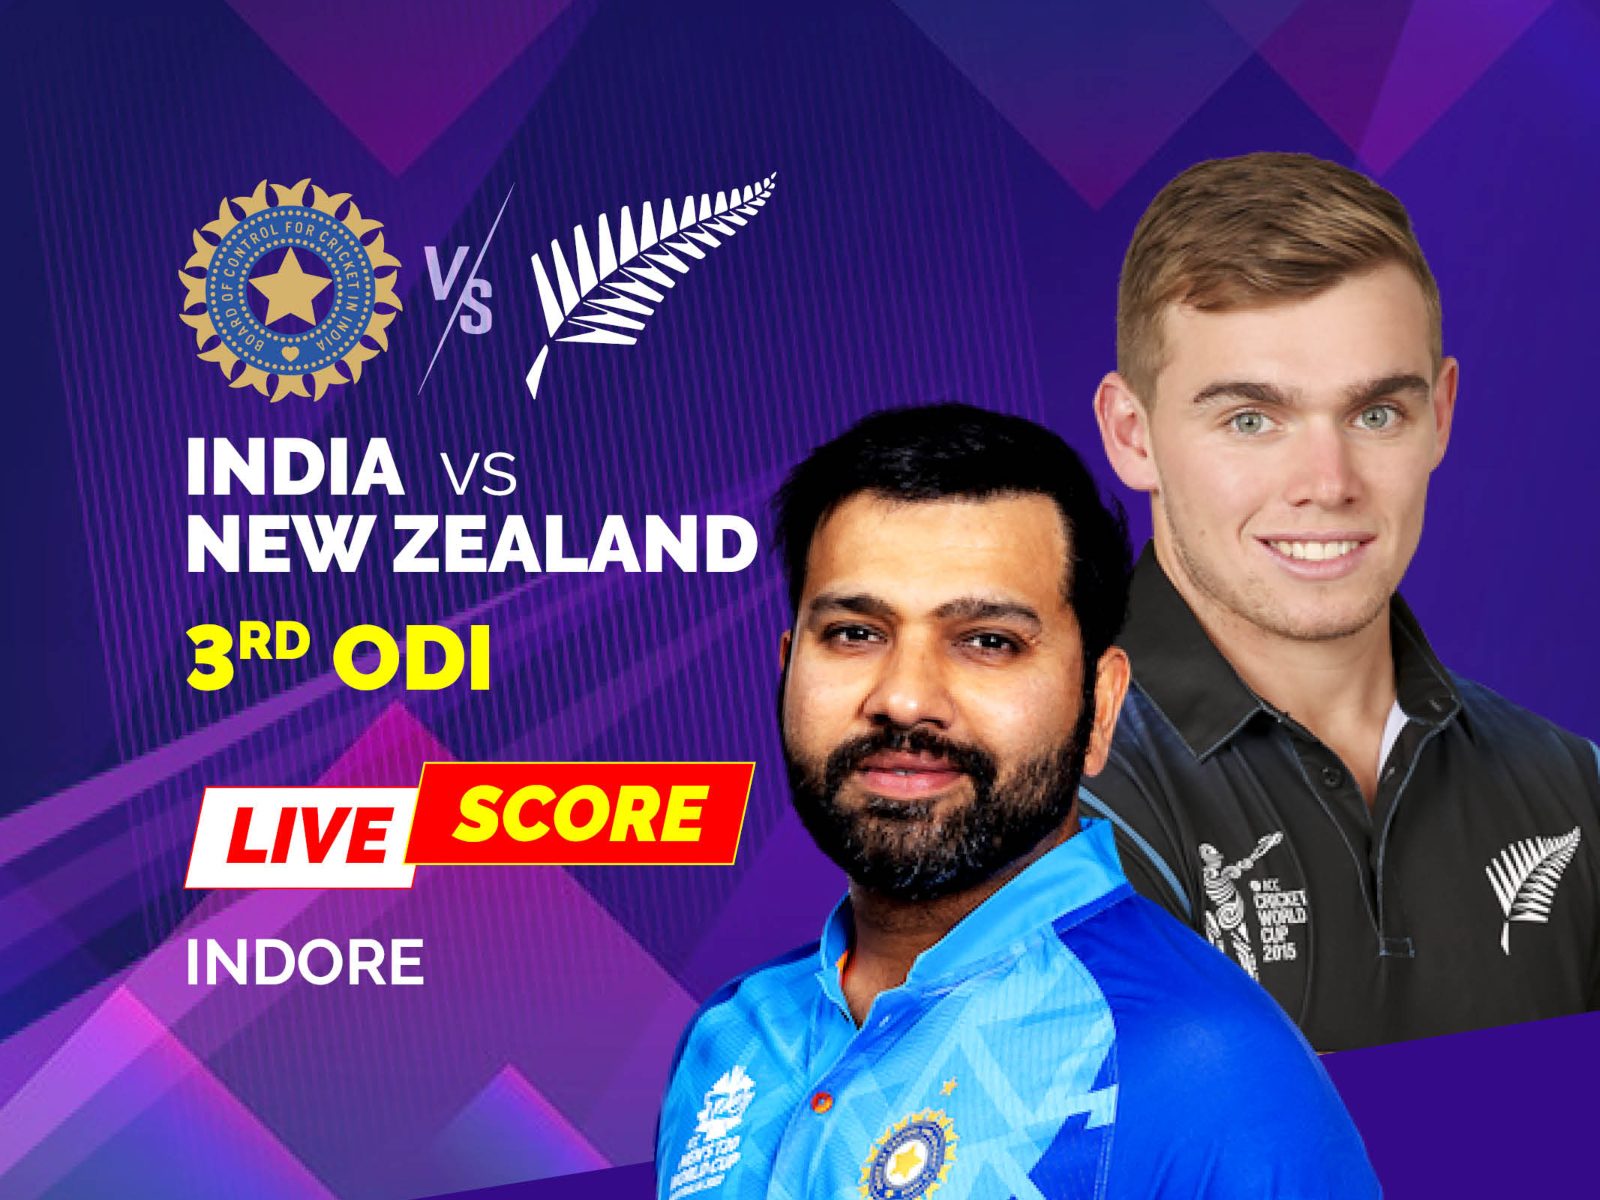 IND vs NZ, 3rd ODI Highlights India Beat New Zealand by 90 Runs to Affect 3-0 Whitewash